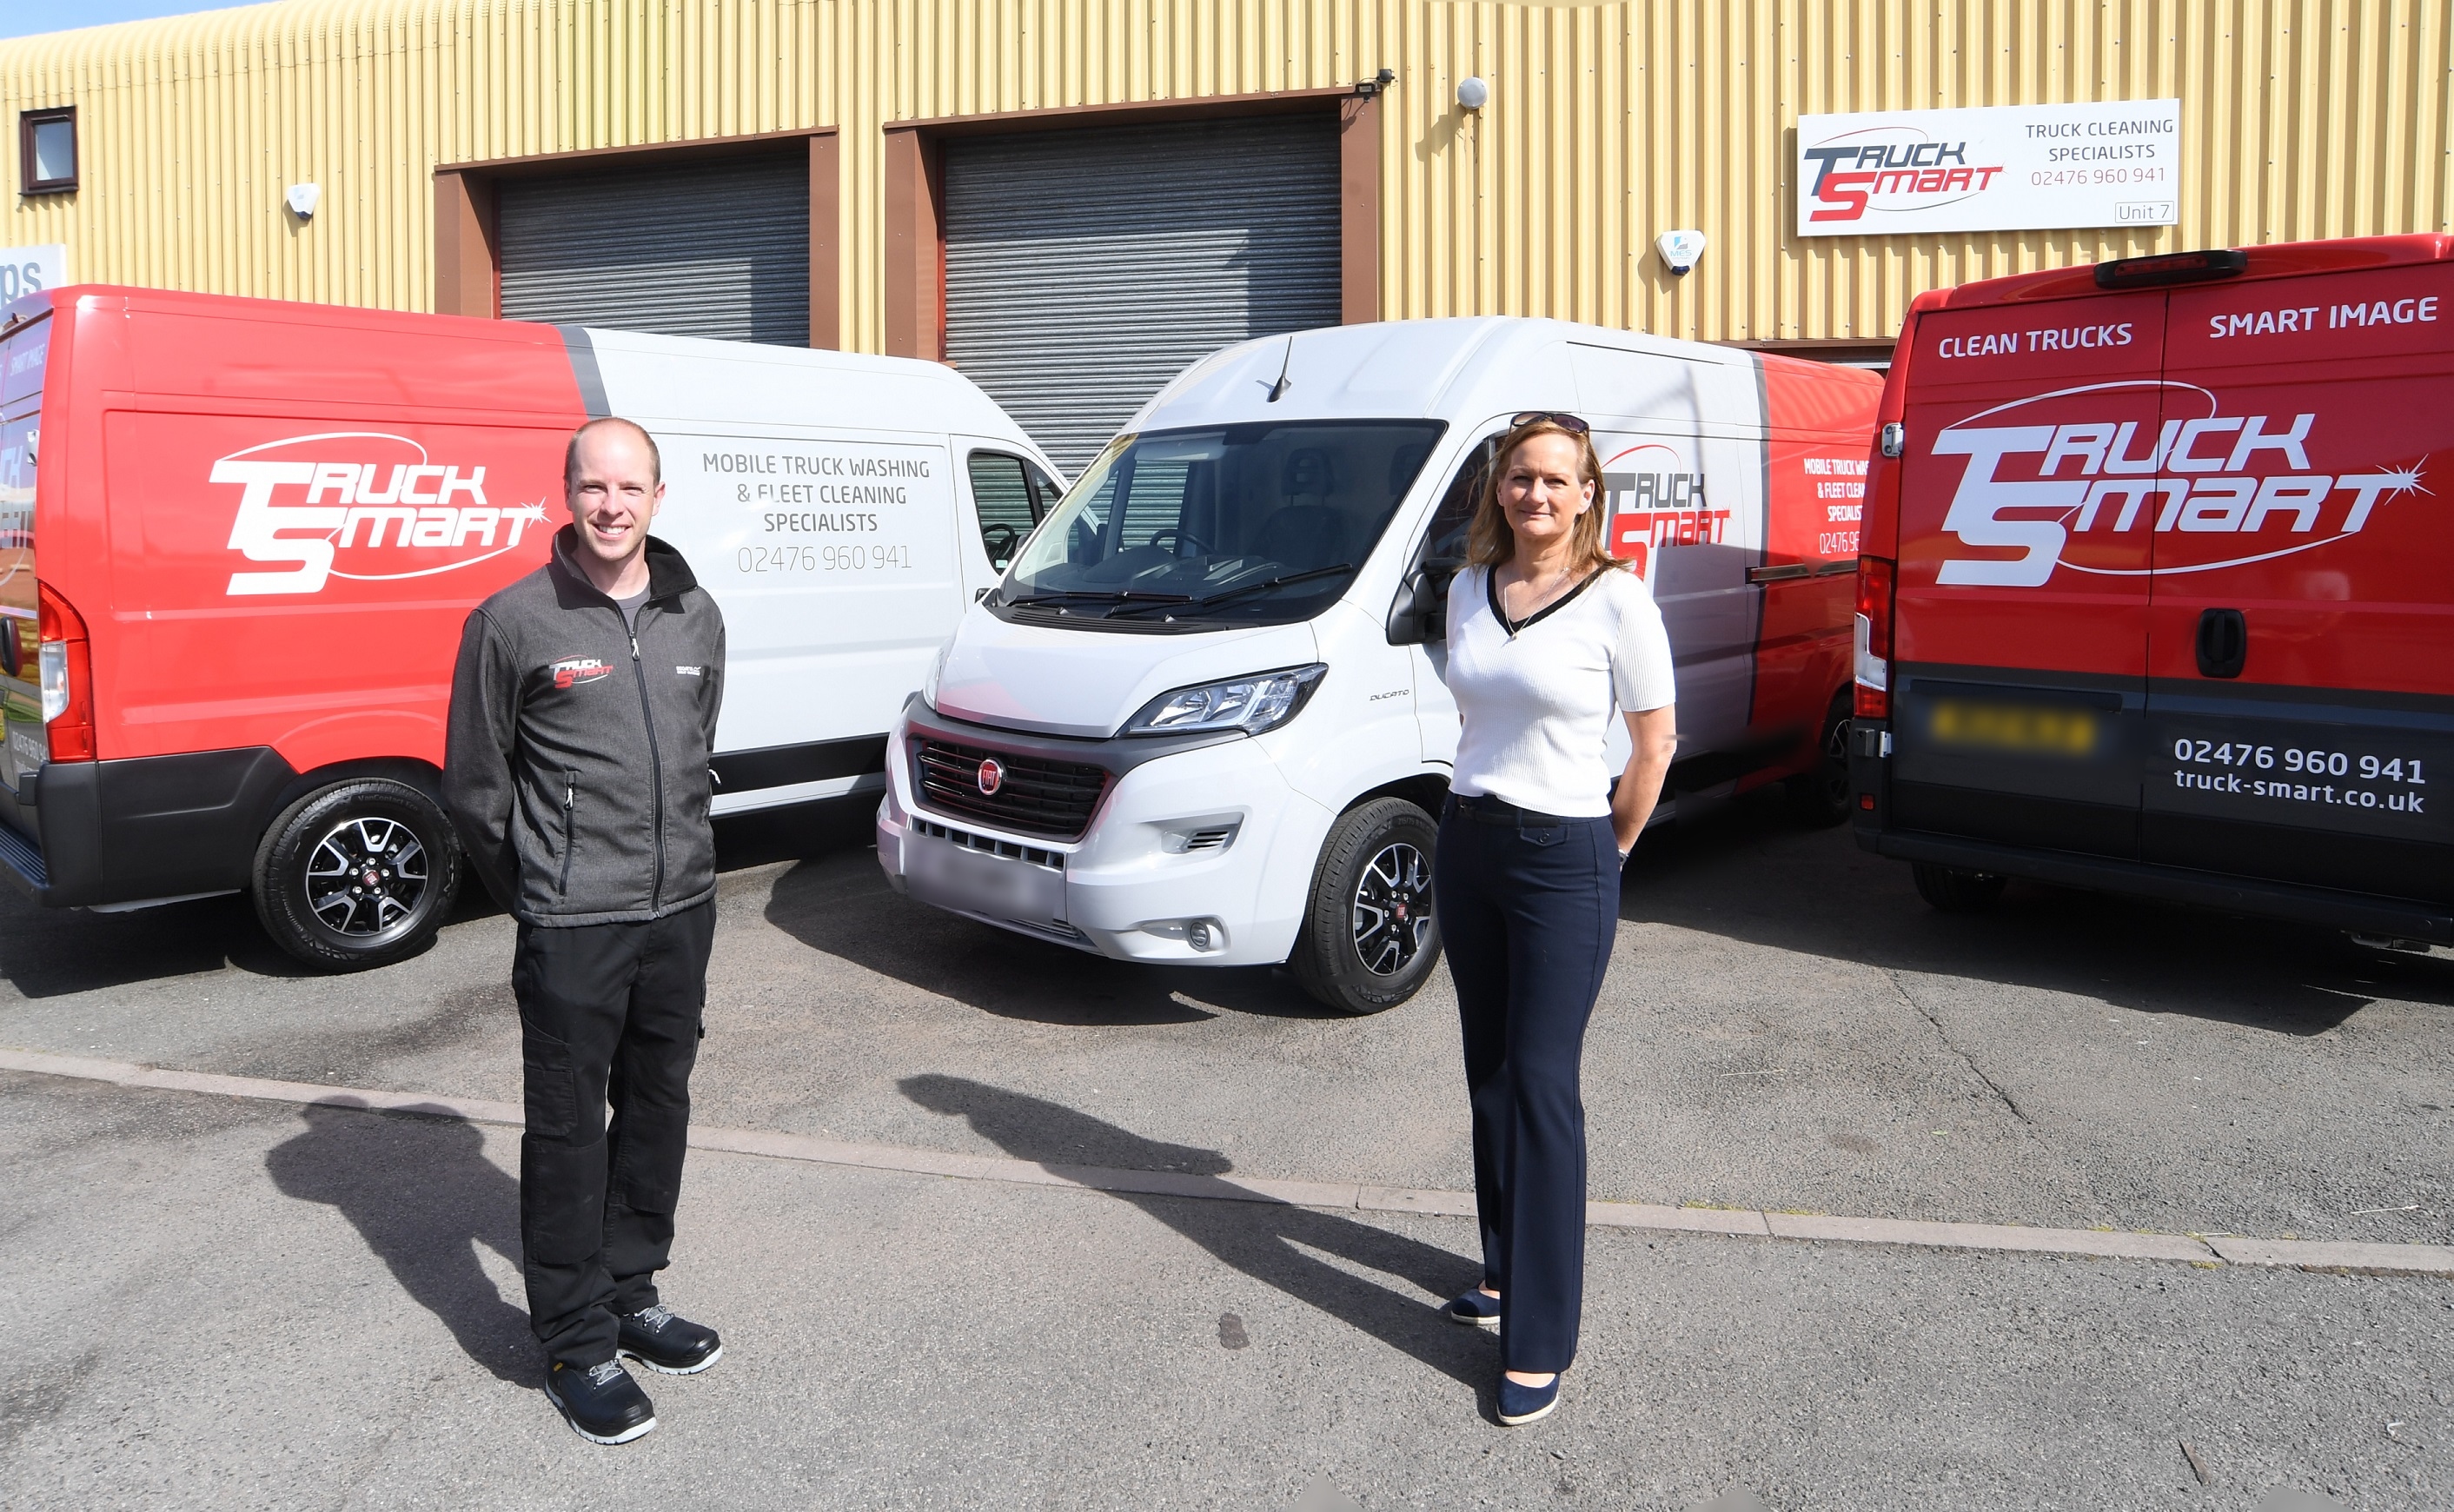 Truck washing firm creates four new jobs in expansion